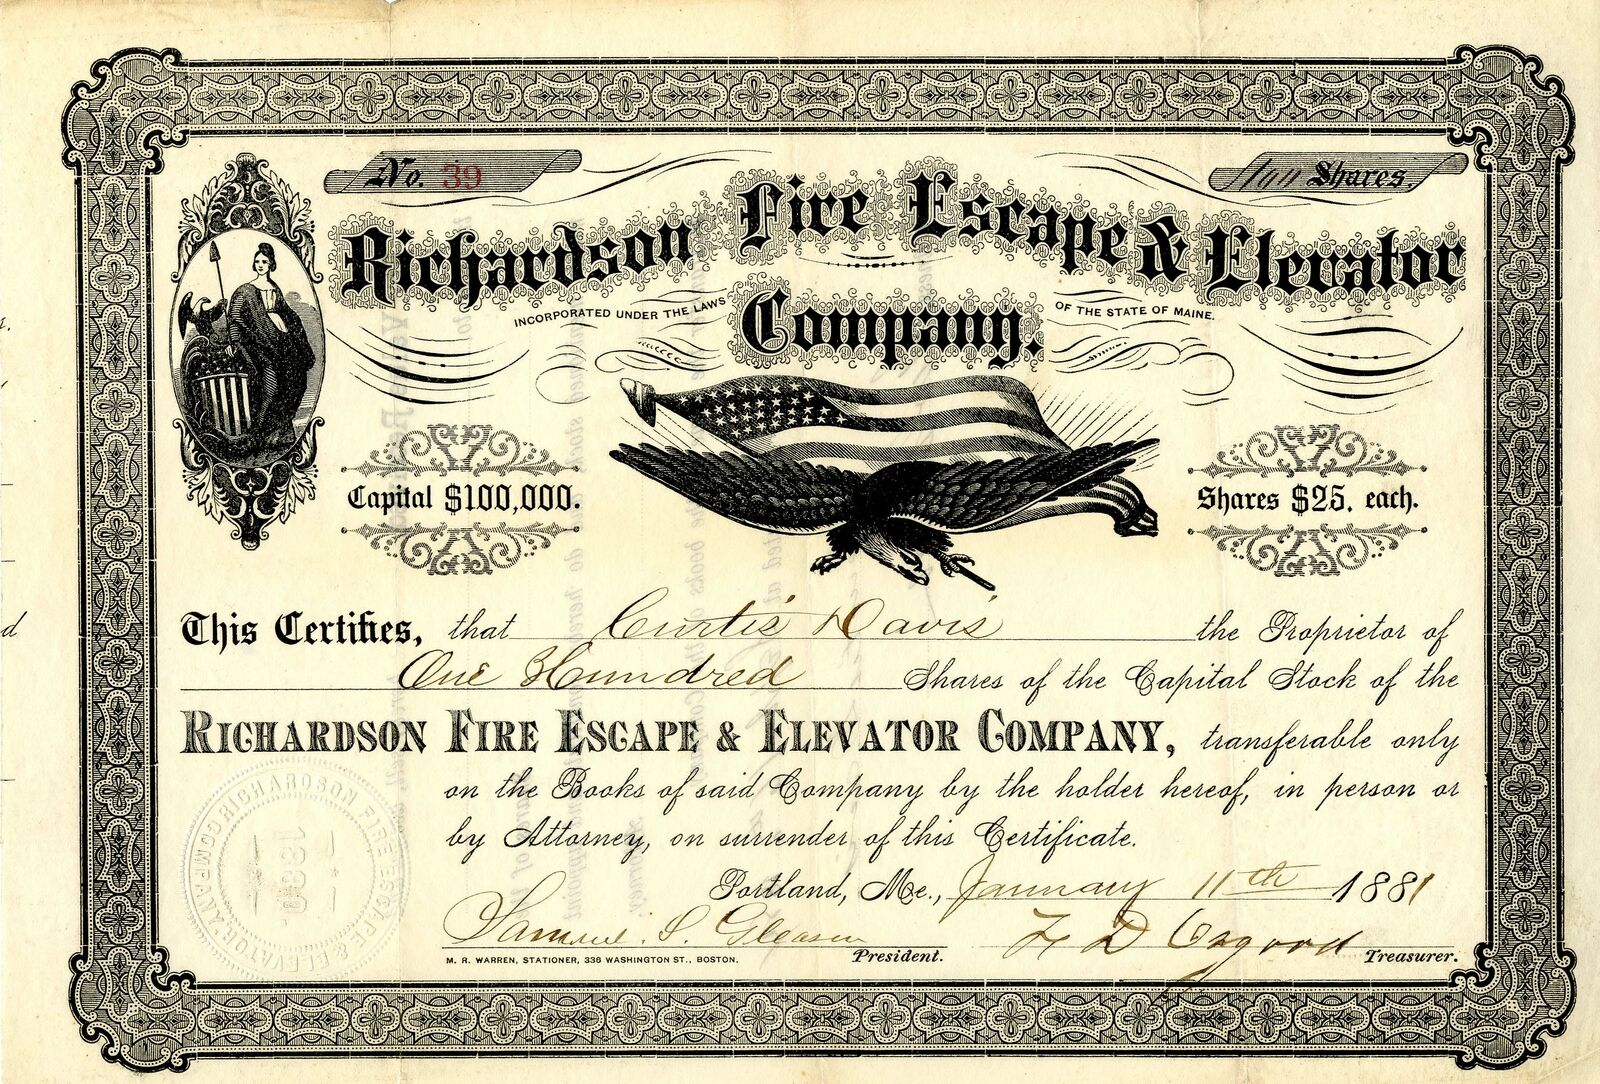 Richardson Fire Escape and Elevator Co. - General Stocks